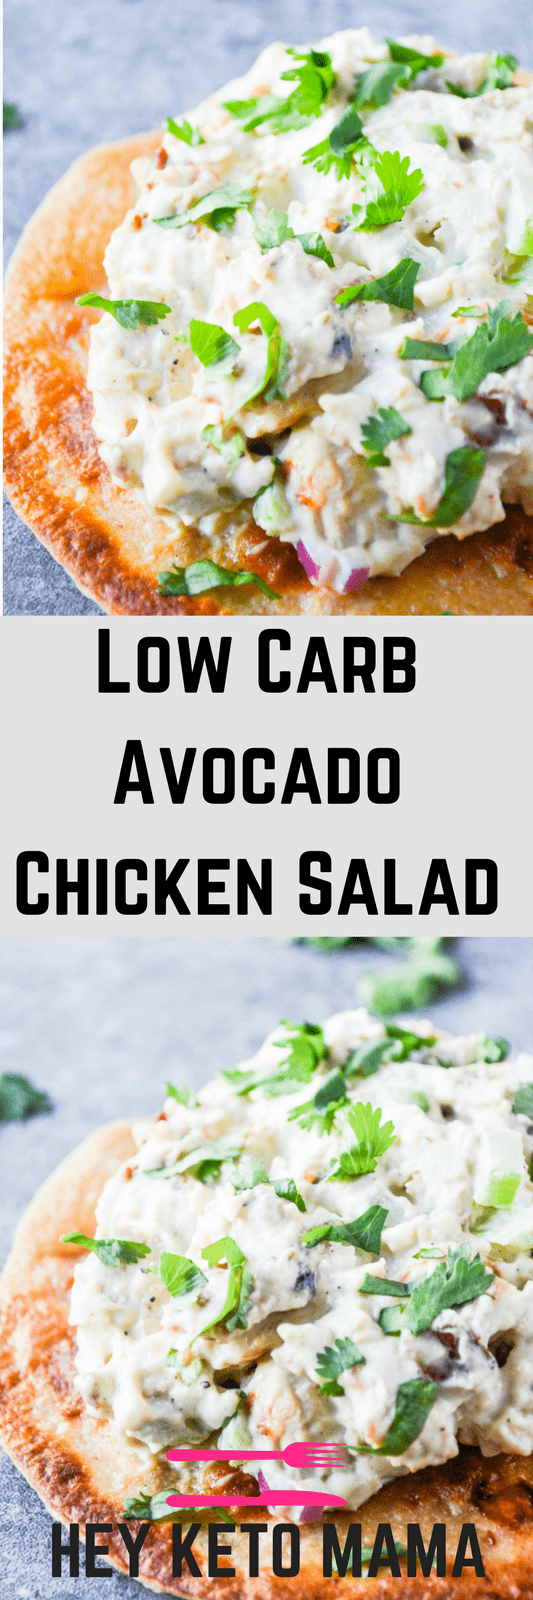 This Low Carb Avocado Chicken Salad is deliciously creamy with a bit of crunch and is the perfect low carb meal on the go! | heyketomama.com